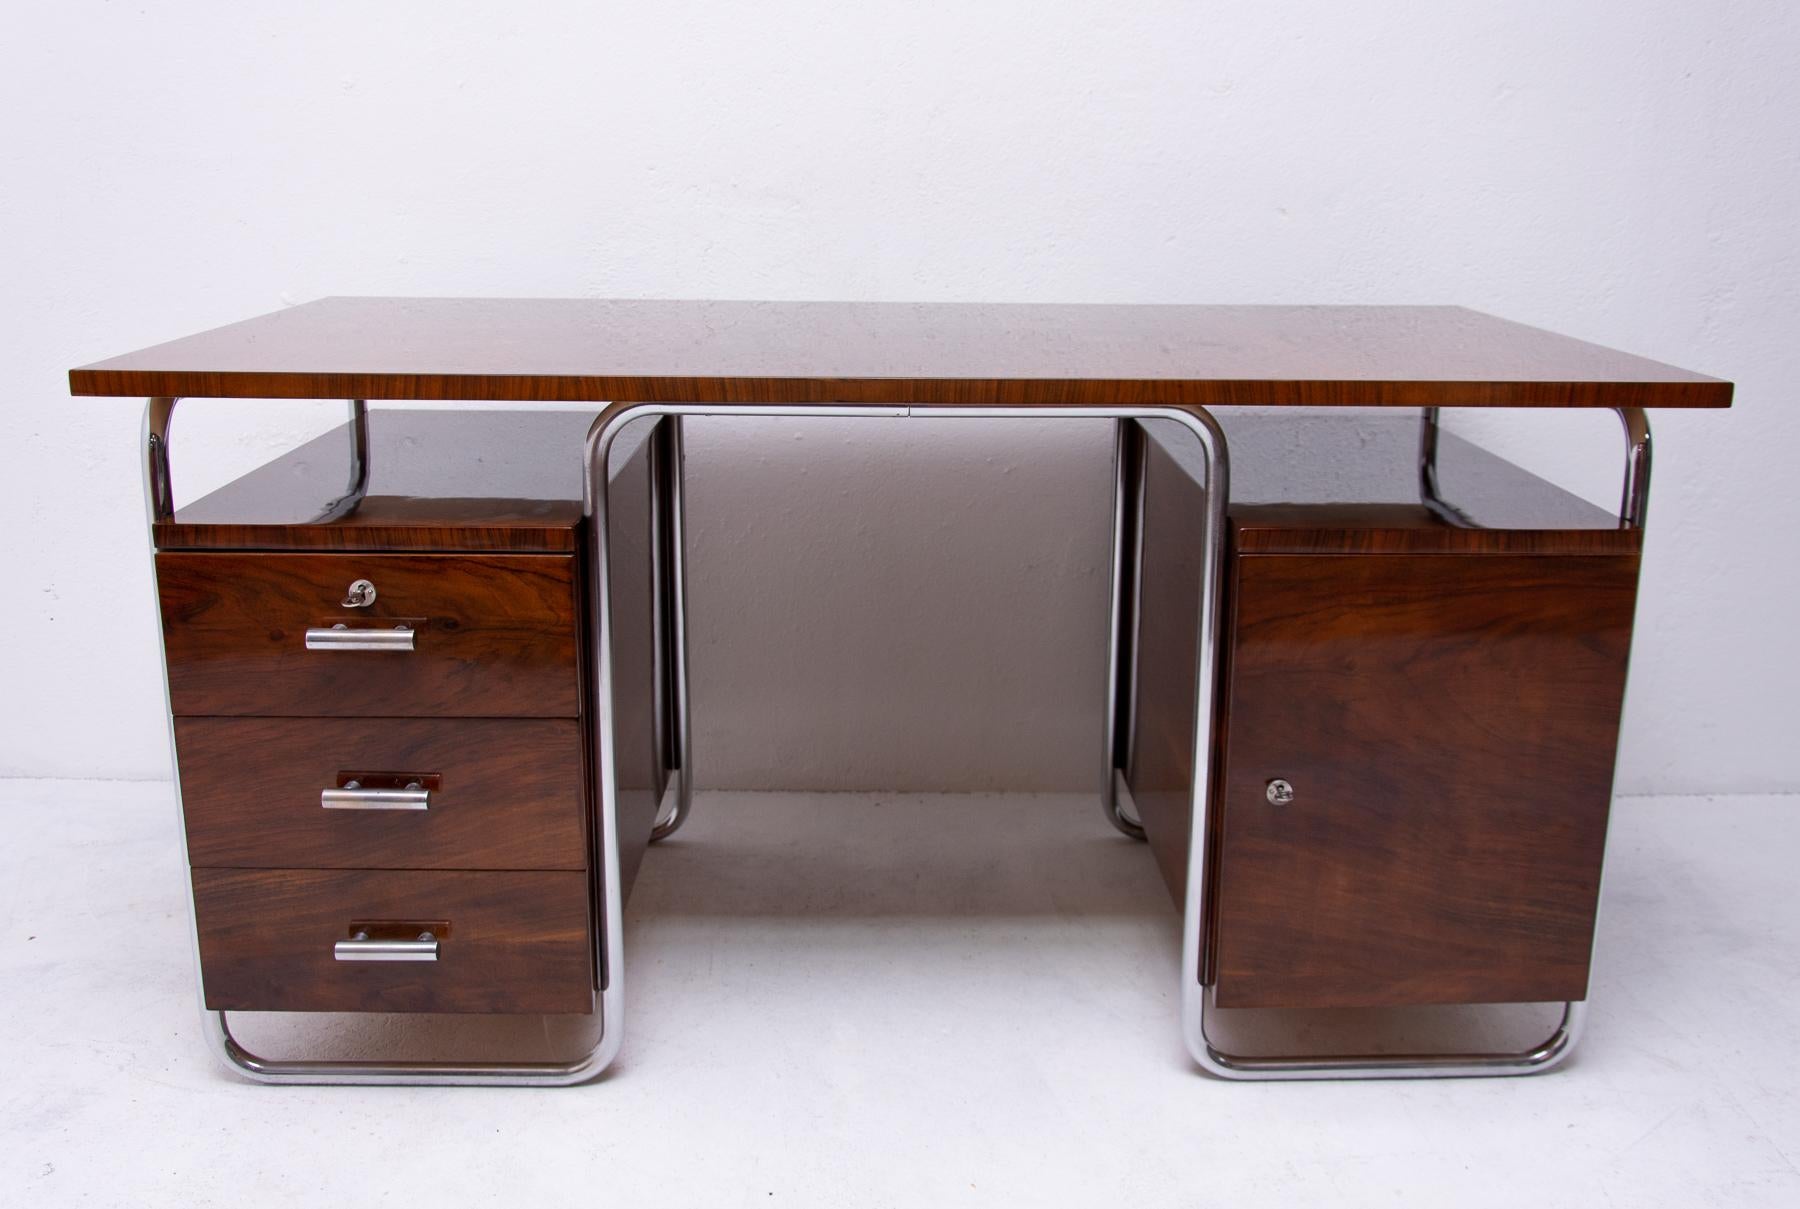 Tubular massive writing desk from the 1930s from the Bauhaus period. It was designed by legendary Jindrich Halabala for the ÚP Závody Brno. A typical example of European functionalism and the works of leading designers of this period such as Marcel